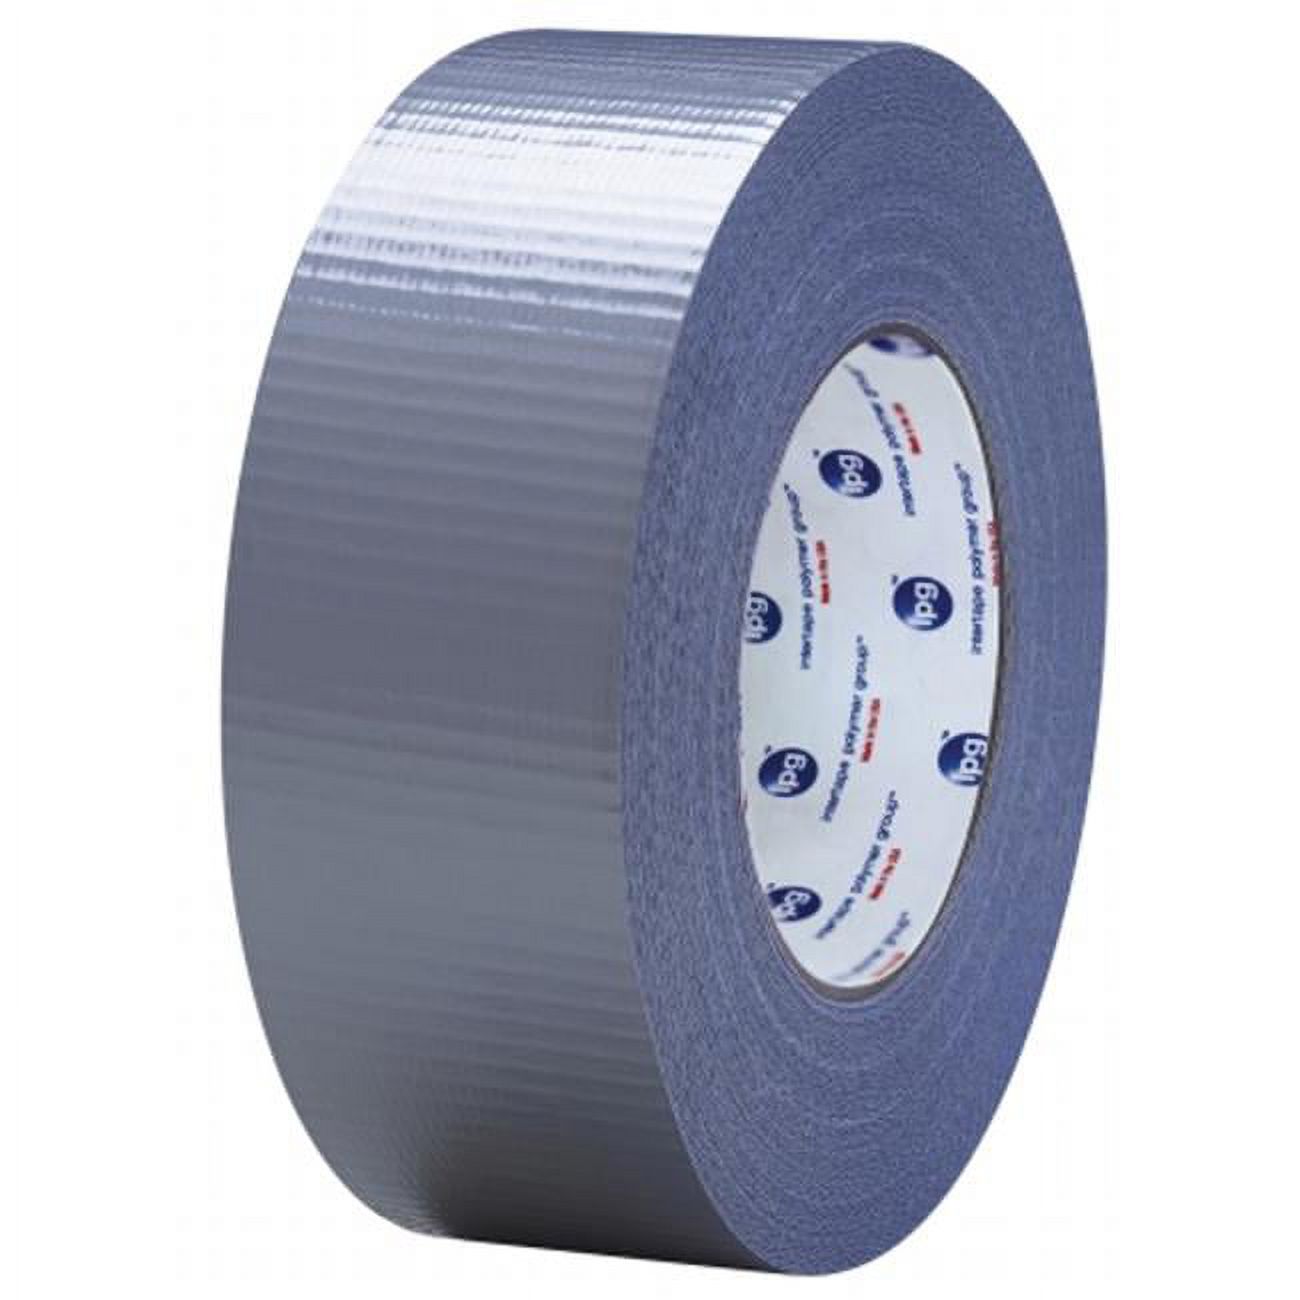 IPG 4137 Duct Tape, 60 yd L, 1.88 in W, Cloth Backing, Silver - image 1 of 2